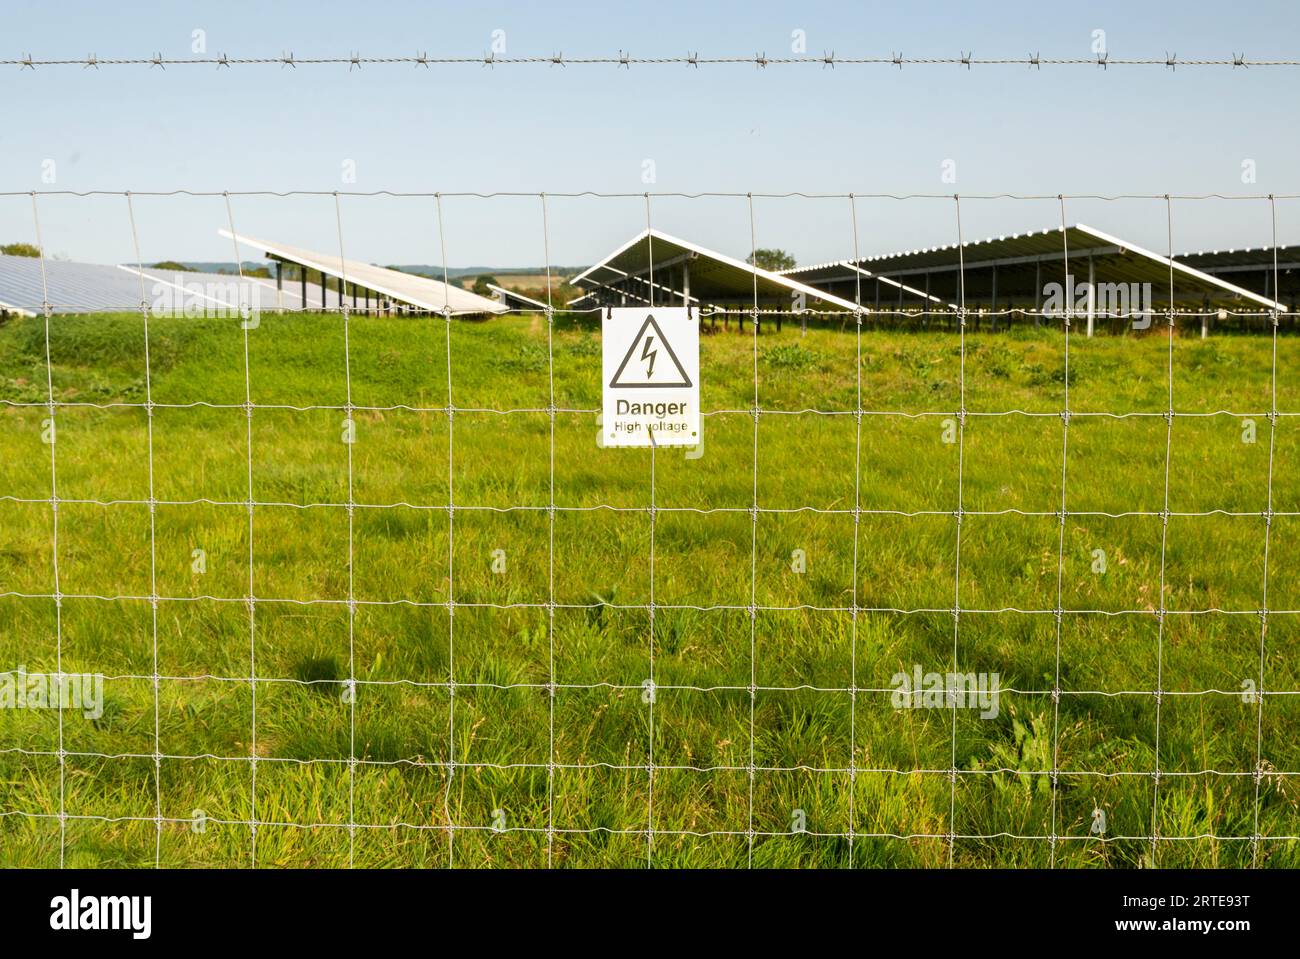 Attached to the barbed wire security fence,surrounding an area of solar panels,at a remote rural locaton in the Cotswolds area of the English countrys Stock Photo